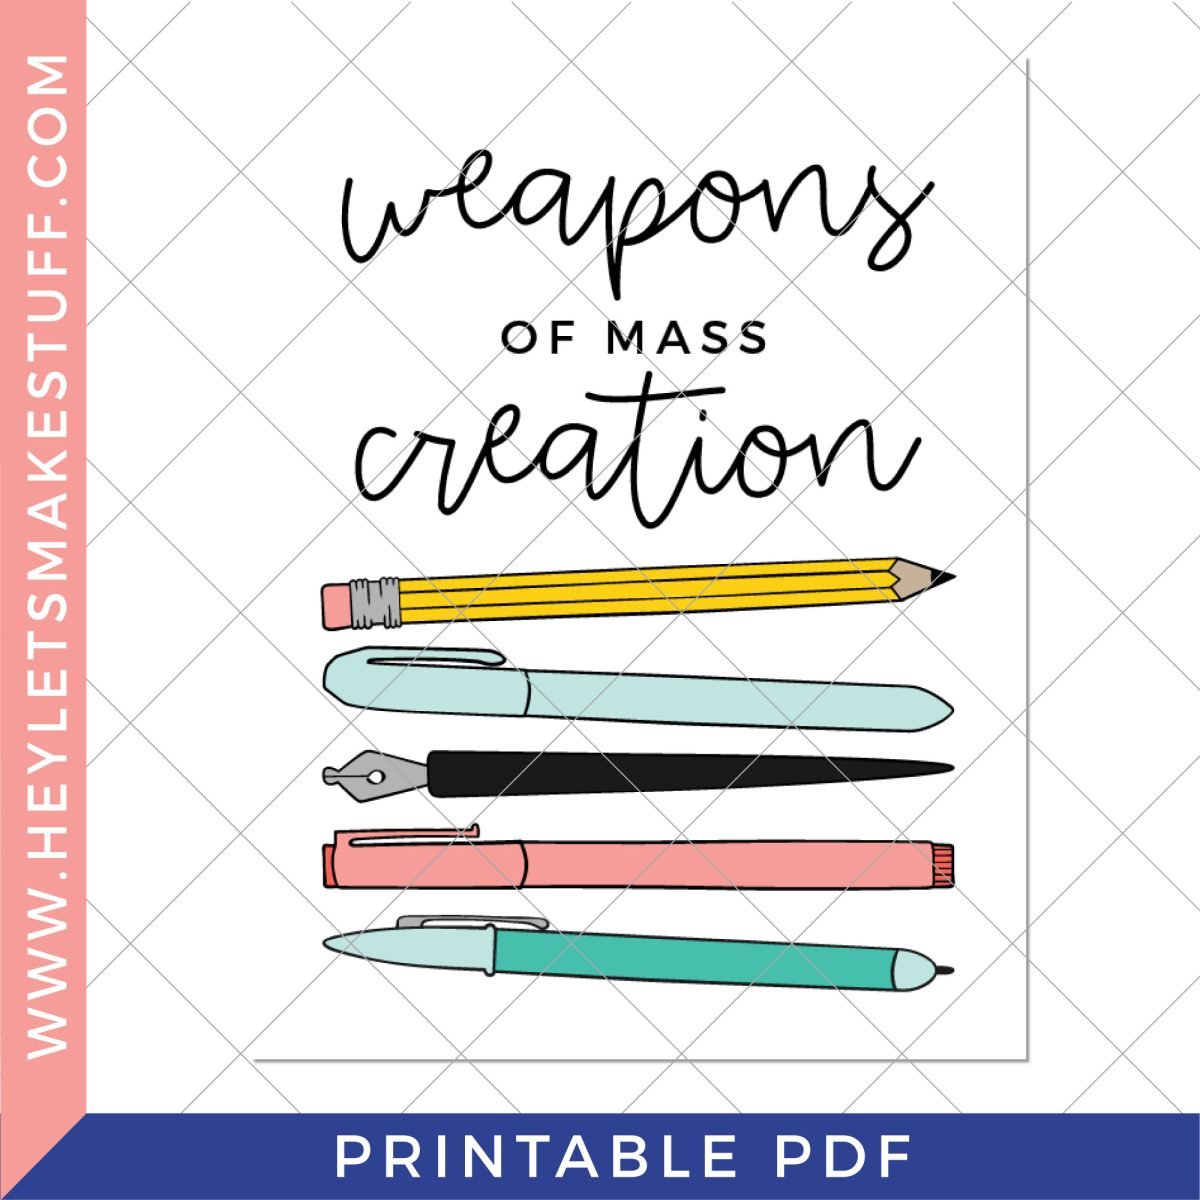 Color version of Weapons of Mass Creation Printable